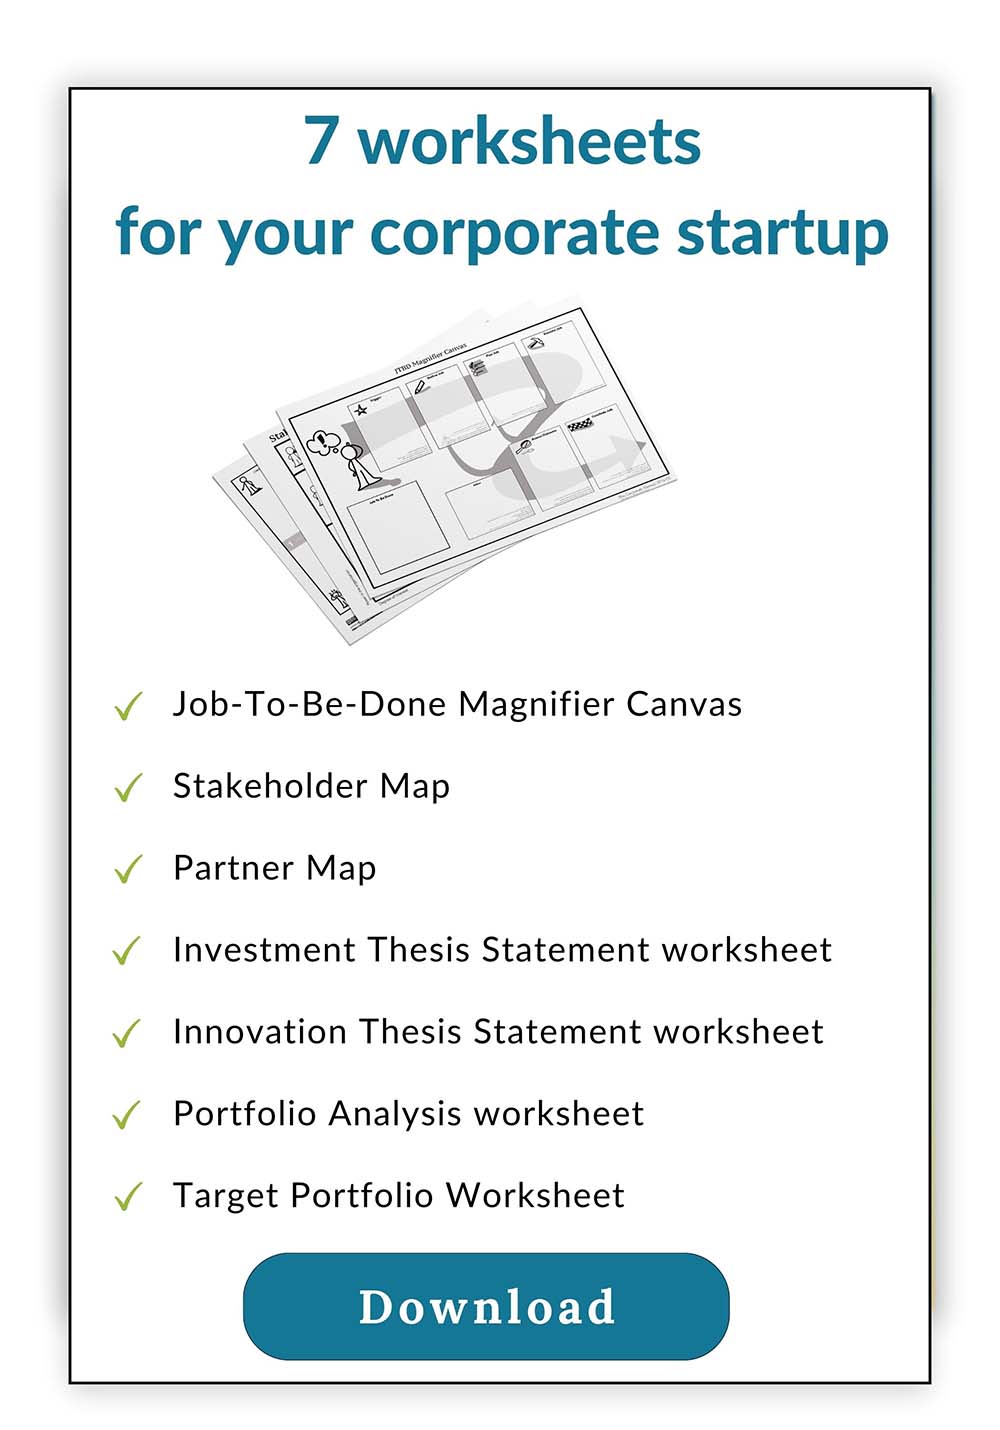 Corporate Startup worksheets